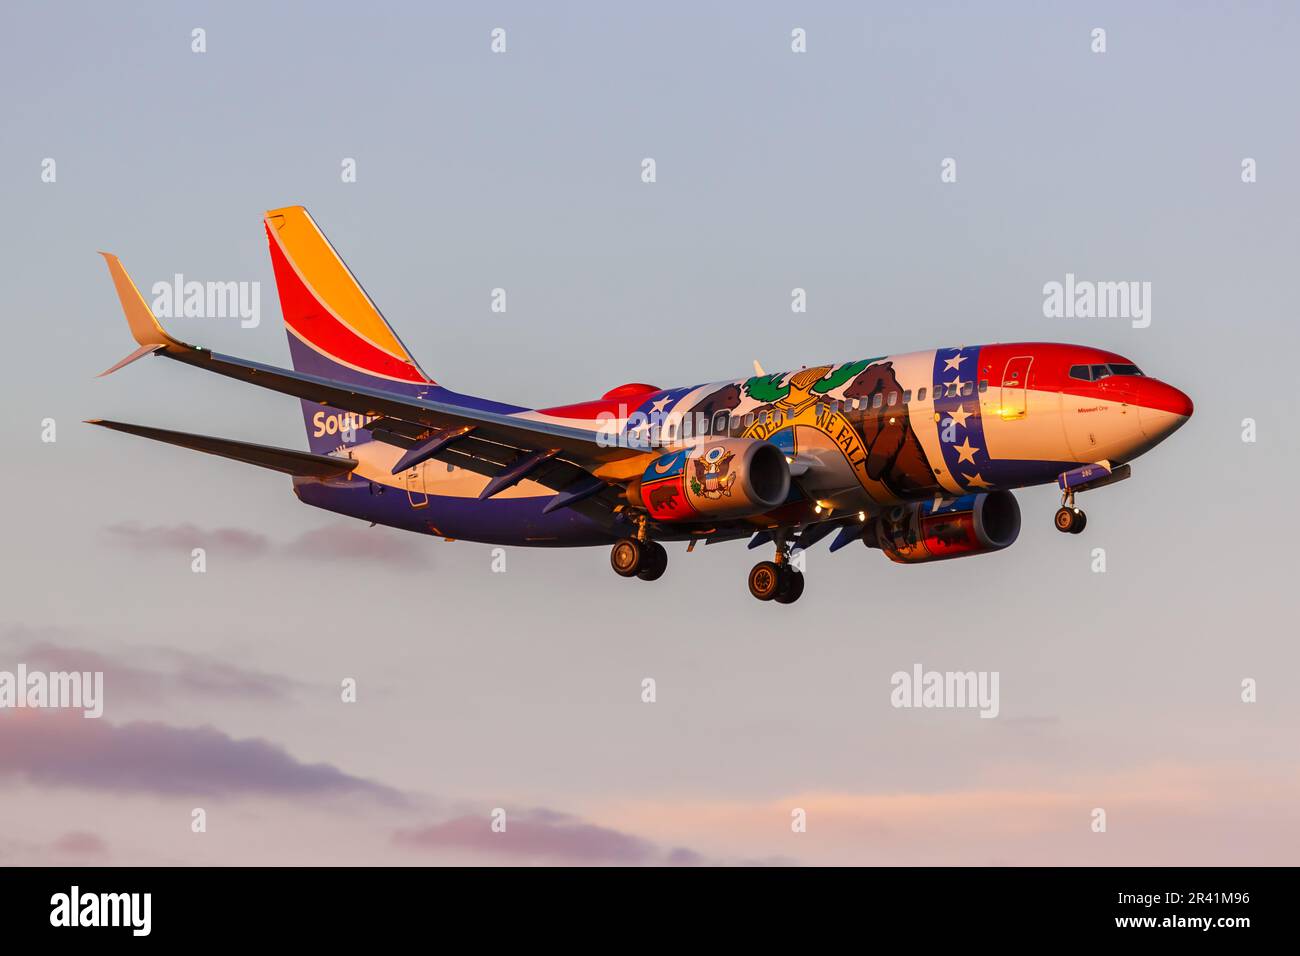 Southwest Boeing 737-700 airplane Dallas Love Field airport in the USA Missouri One special painting Stock Photo